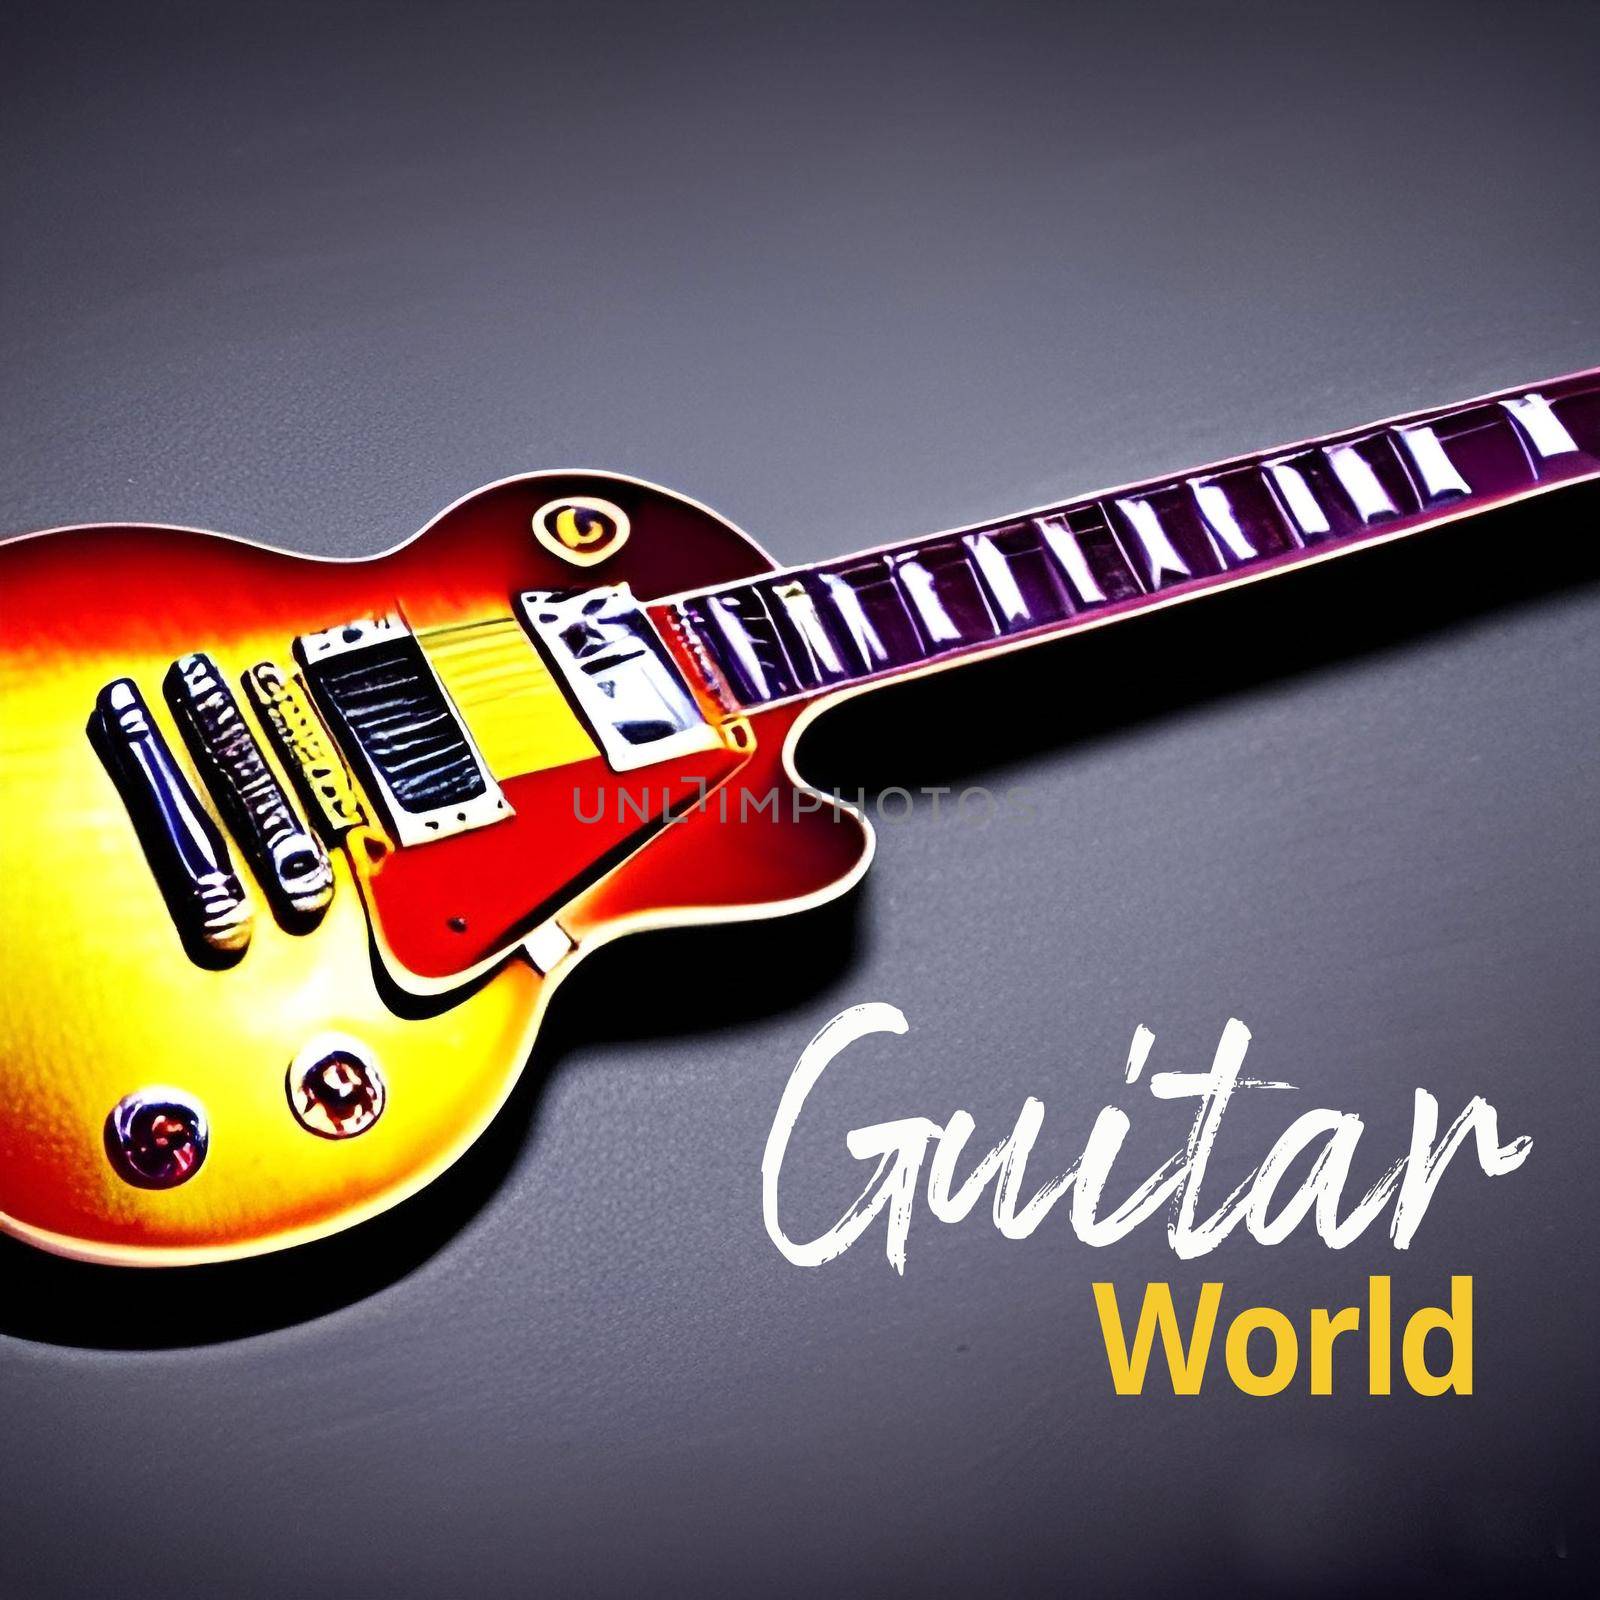 Legendary guitar photoshop painting, with multicolored fantasy background. guitar background good for content background